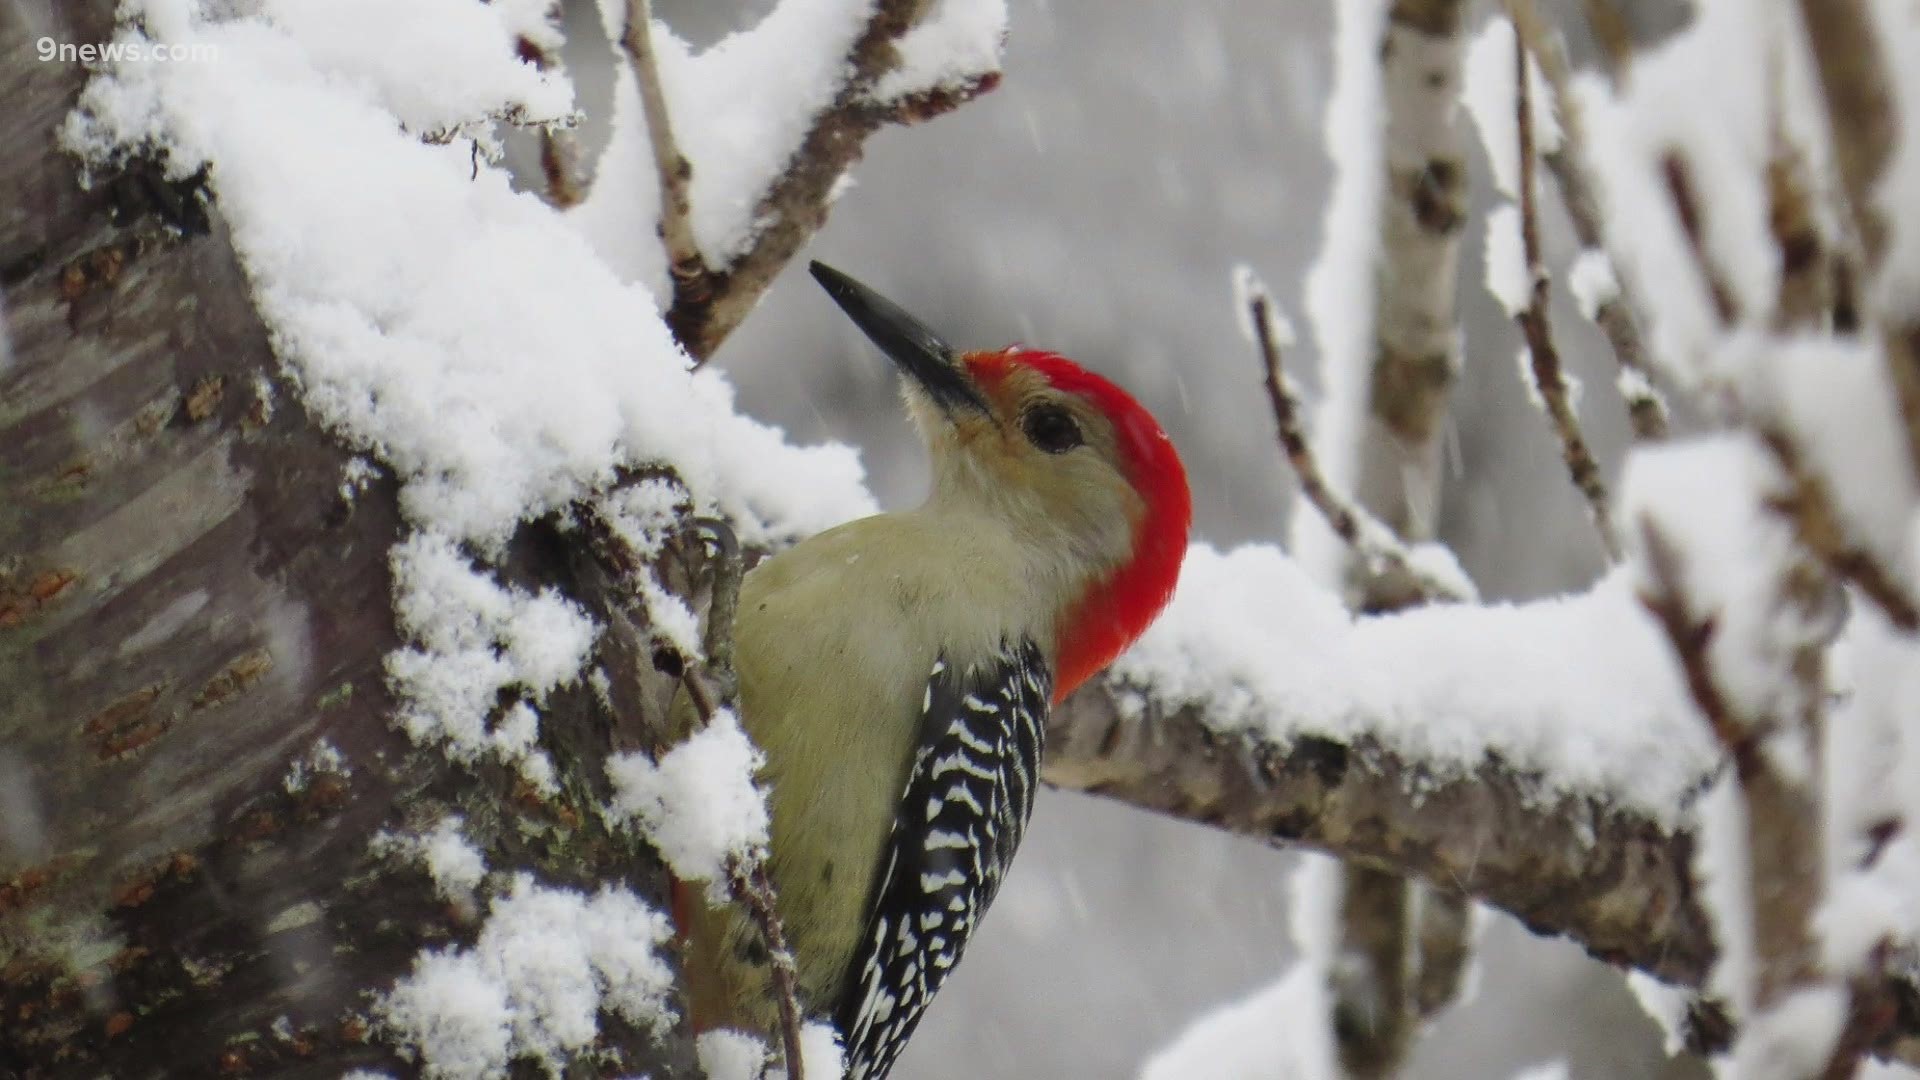 Not all birds head south for the winter. Here are some tips for backyard birding during the colder months.